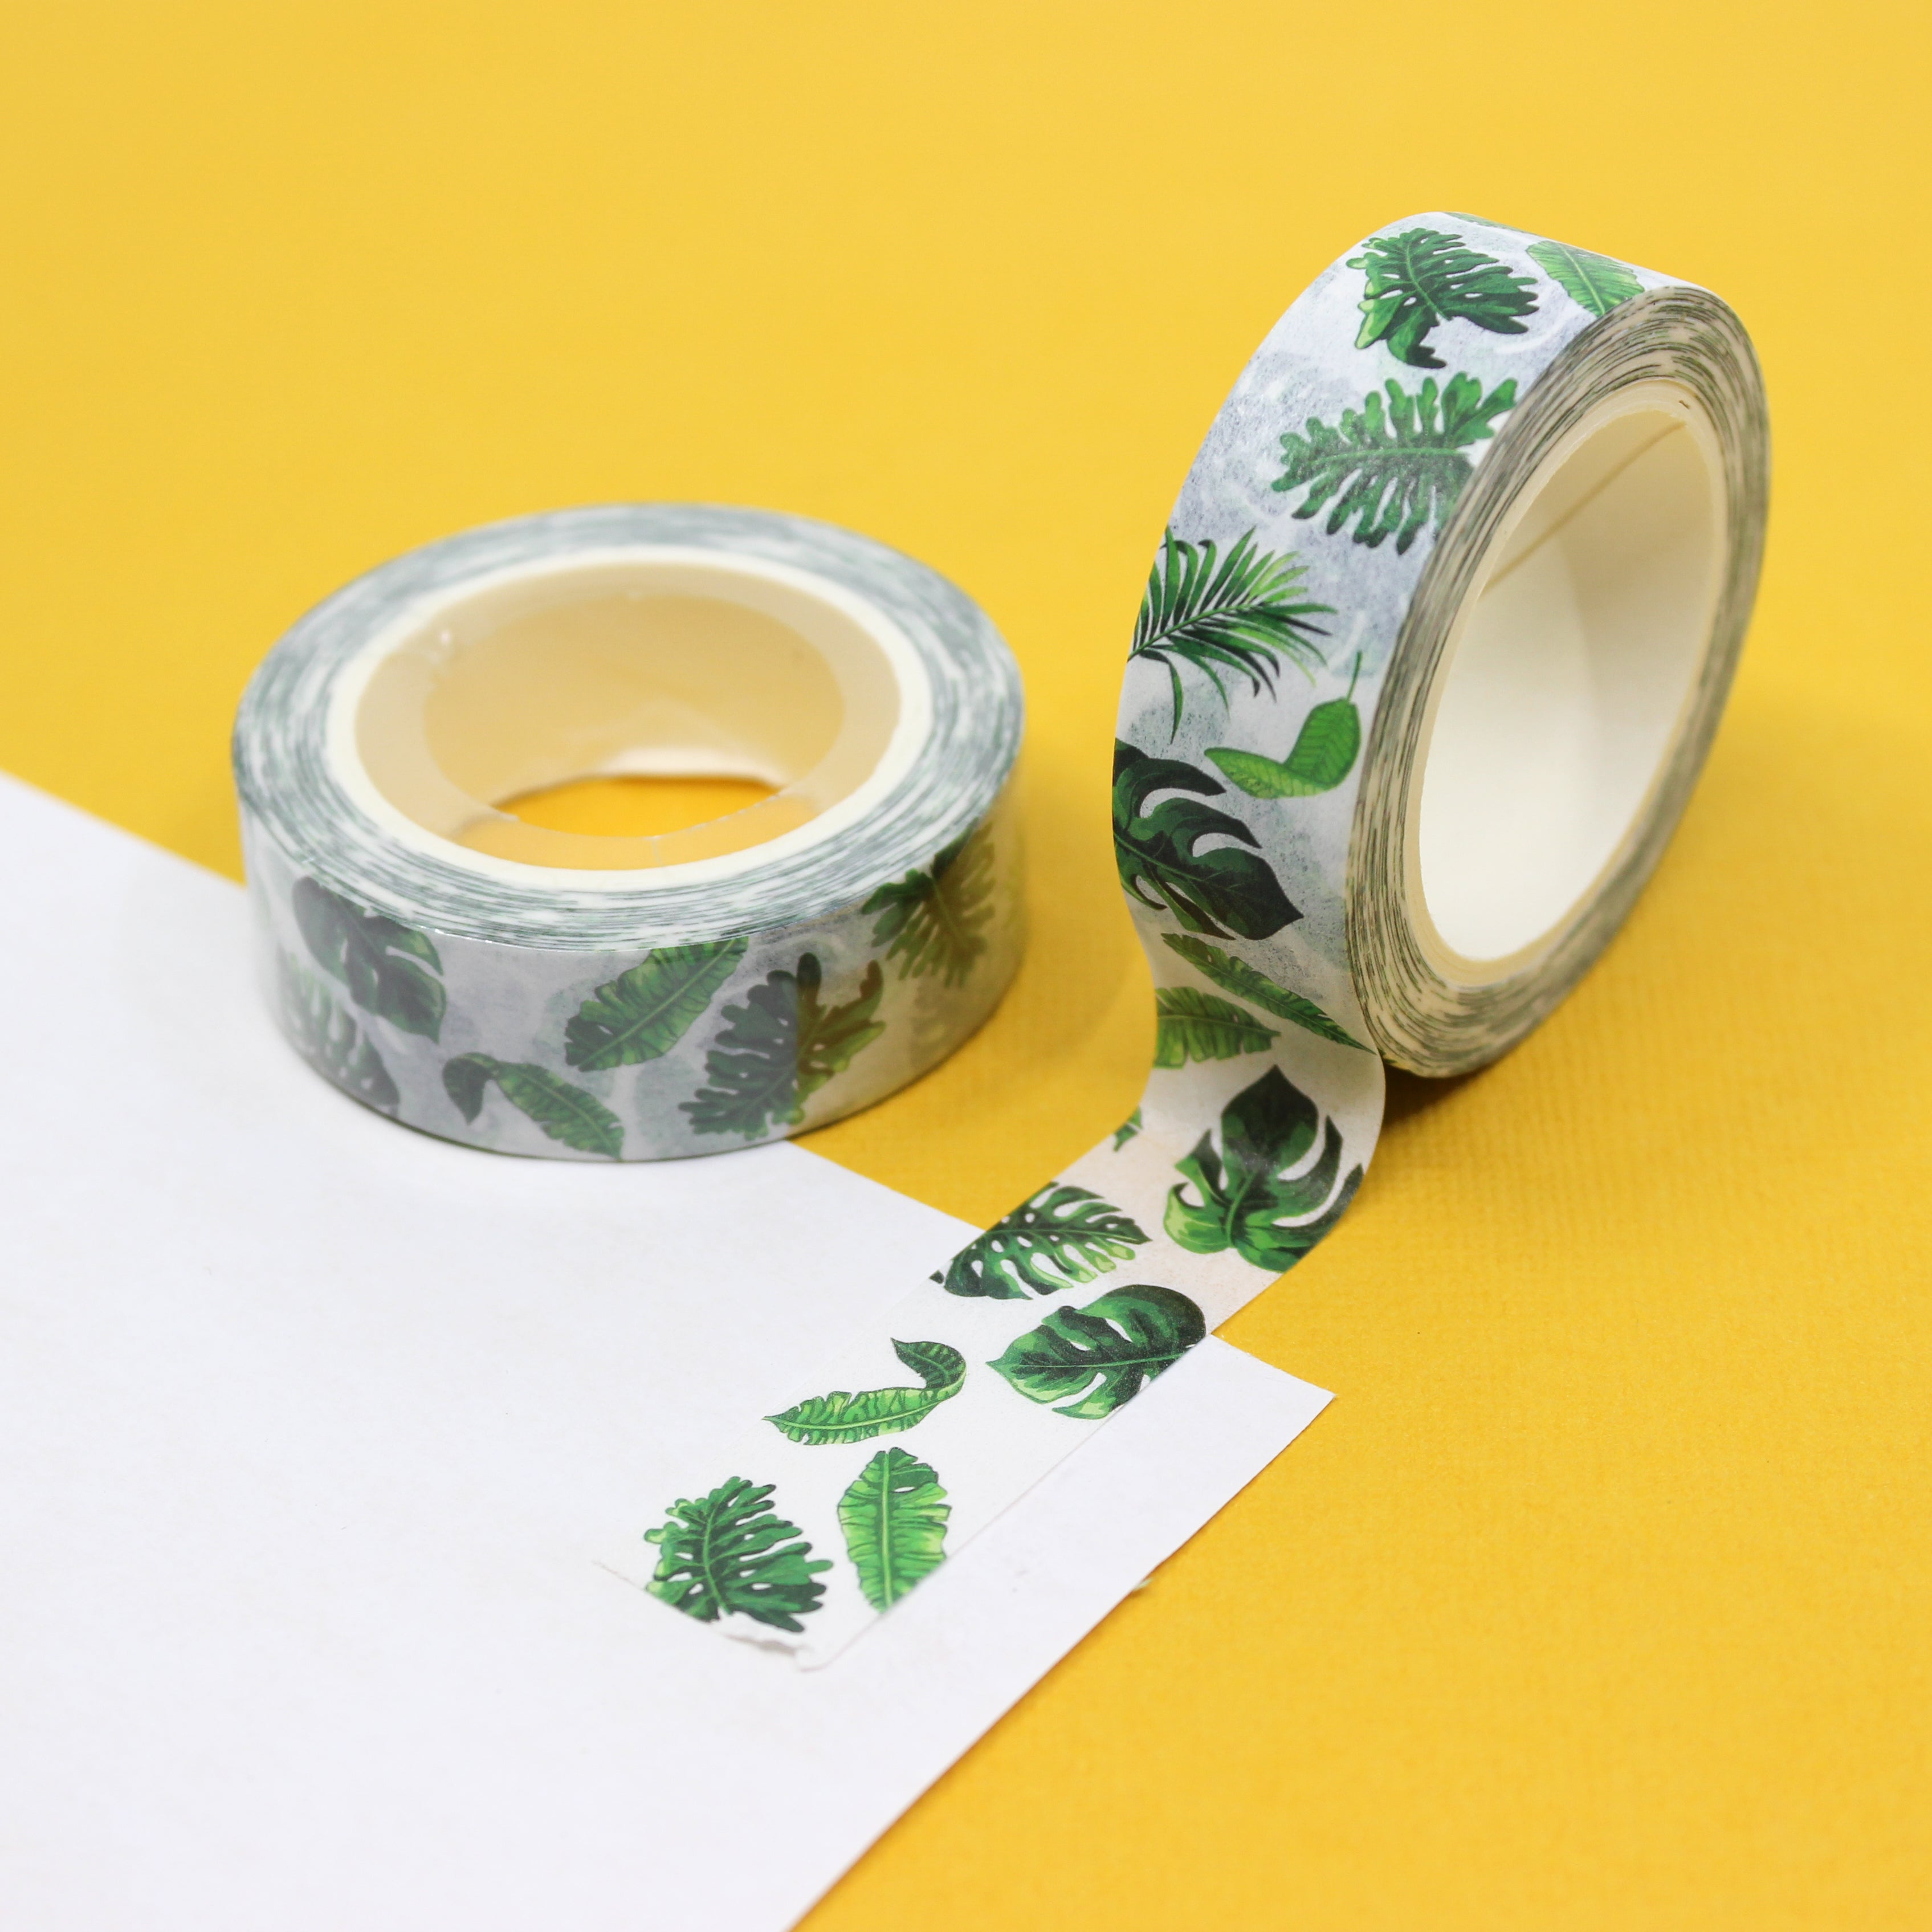 This is a green monstera palm leaf view themed washi tape from BBB Supplies Craft Shop